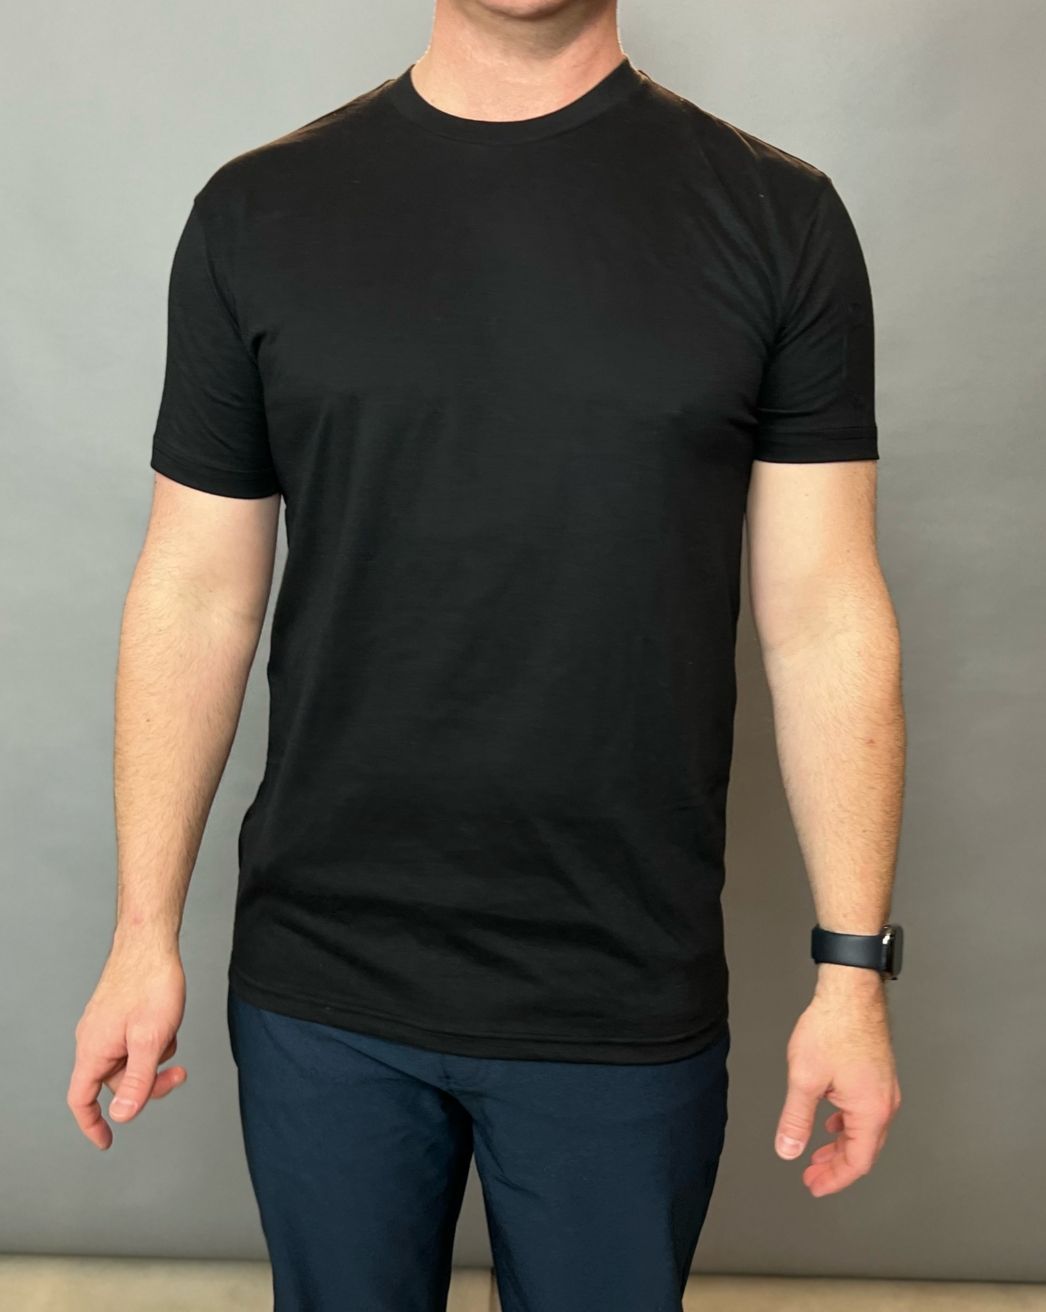 True Classic Tees Review: Don't buy before checking out our review 12